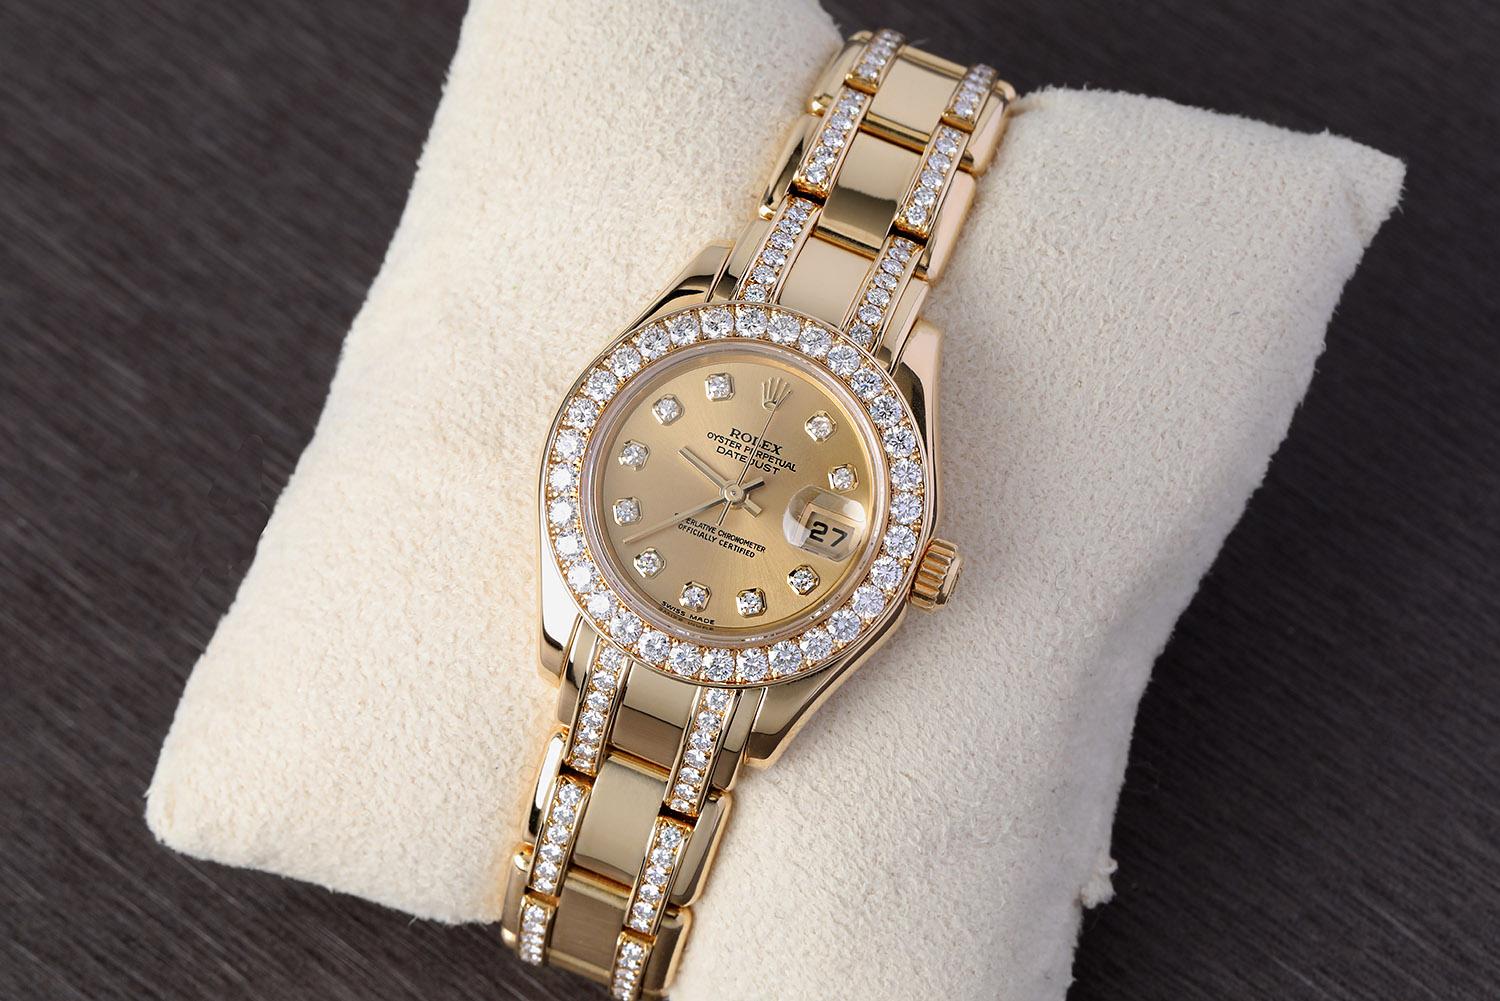 Watch is all factory. Gold-tone 18kt yellow gold case with a gold-tone 18kt yellow gold pearl master bracelet set with 162 diamonds. Fits up to a 6.5 inch wrist. Fixed diamond set bezel. Champagne dial with gold-tone hands and diamond index hour